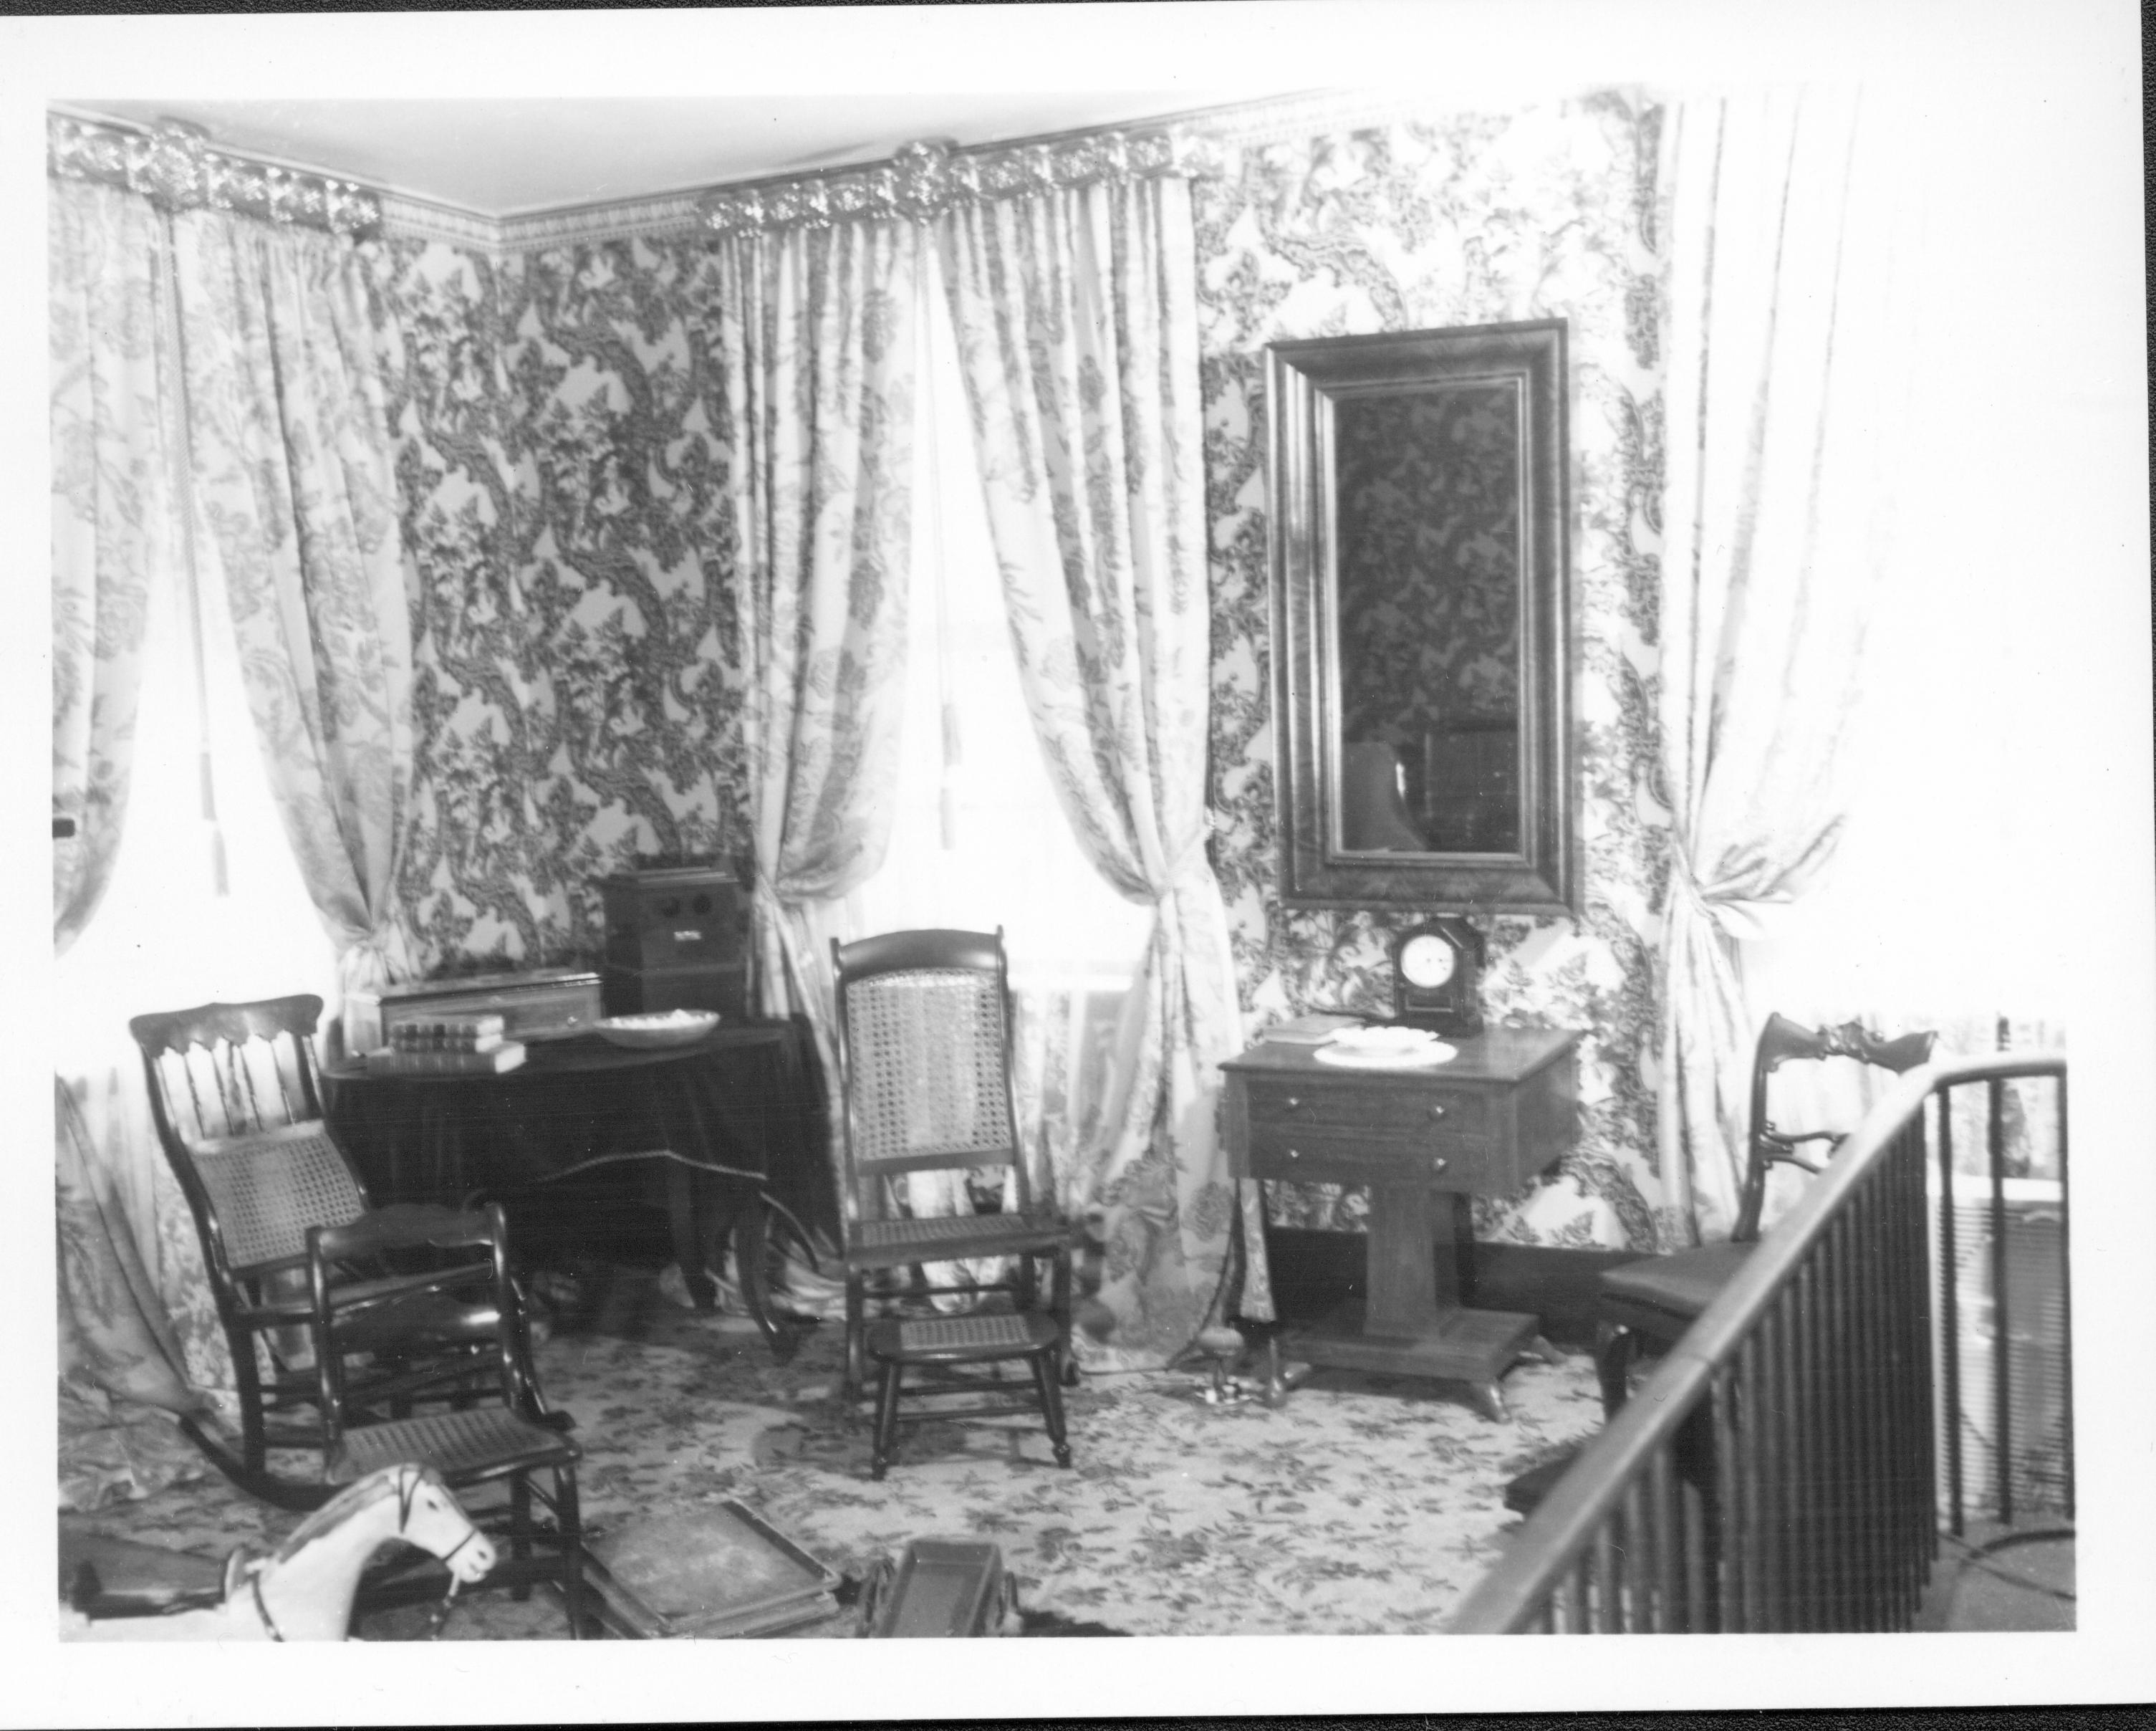 NA class 1, picture 74 Lincoln Home, Sitting Room, chairs, wooden horse, furnishings